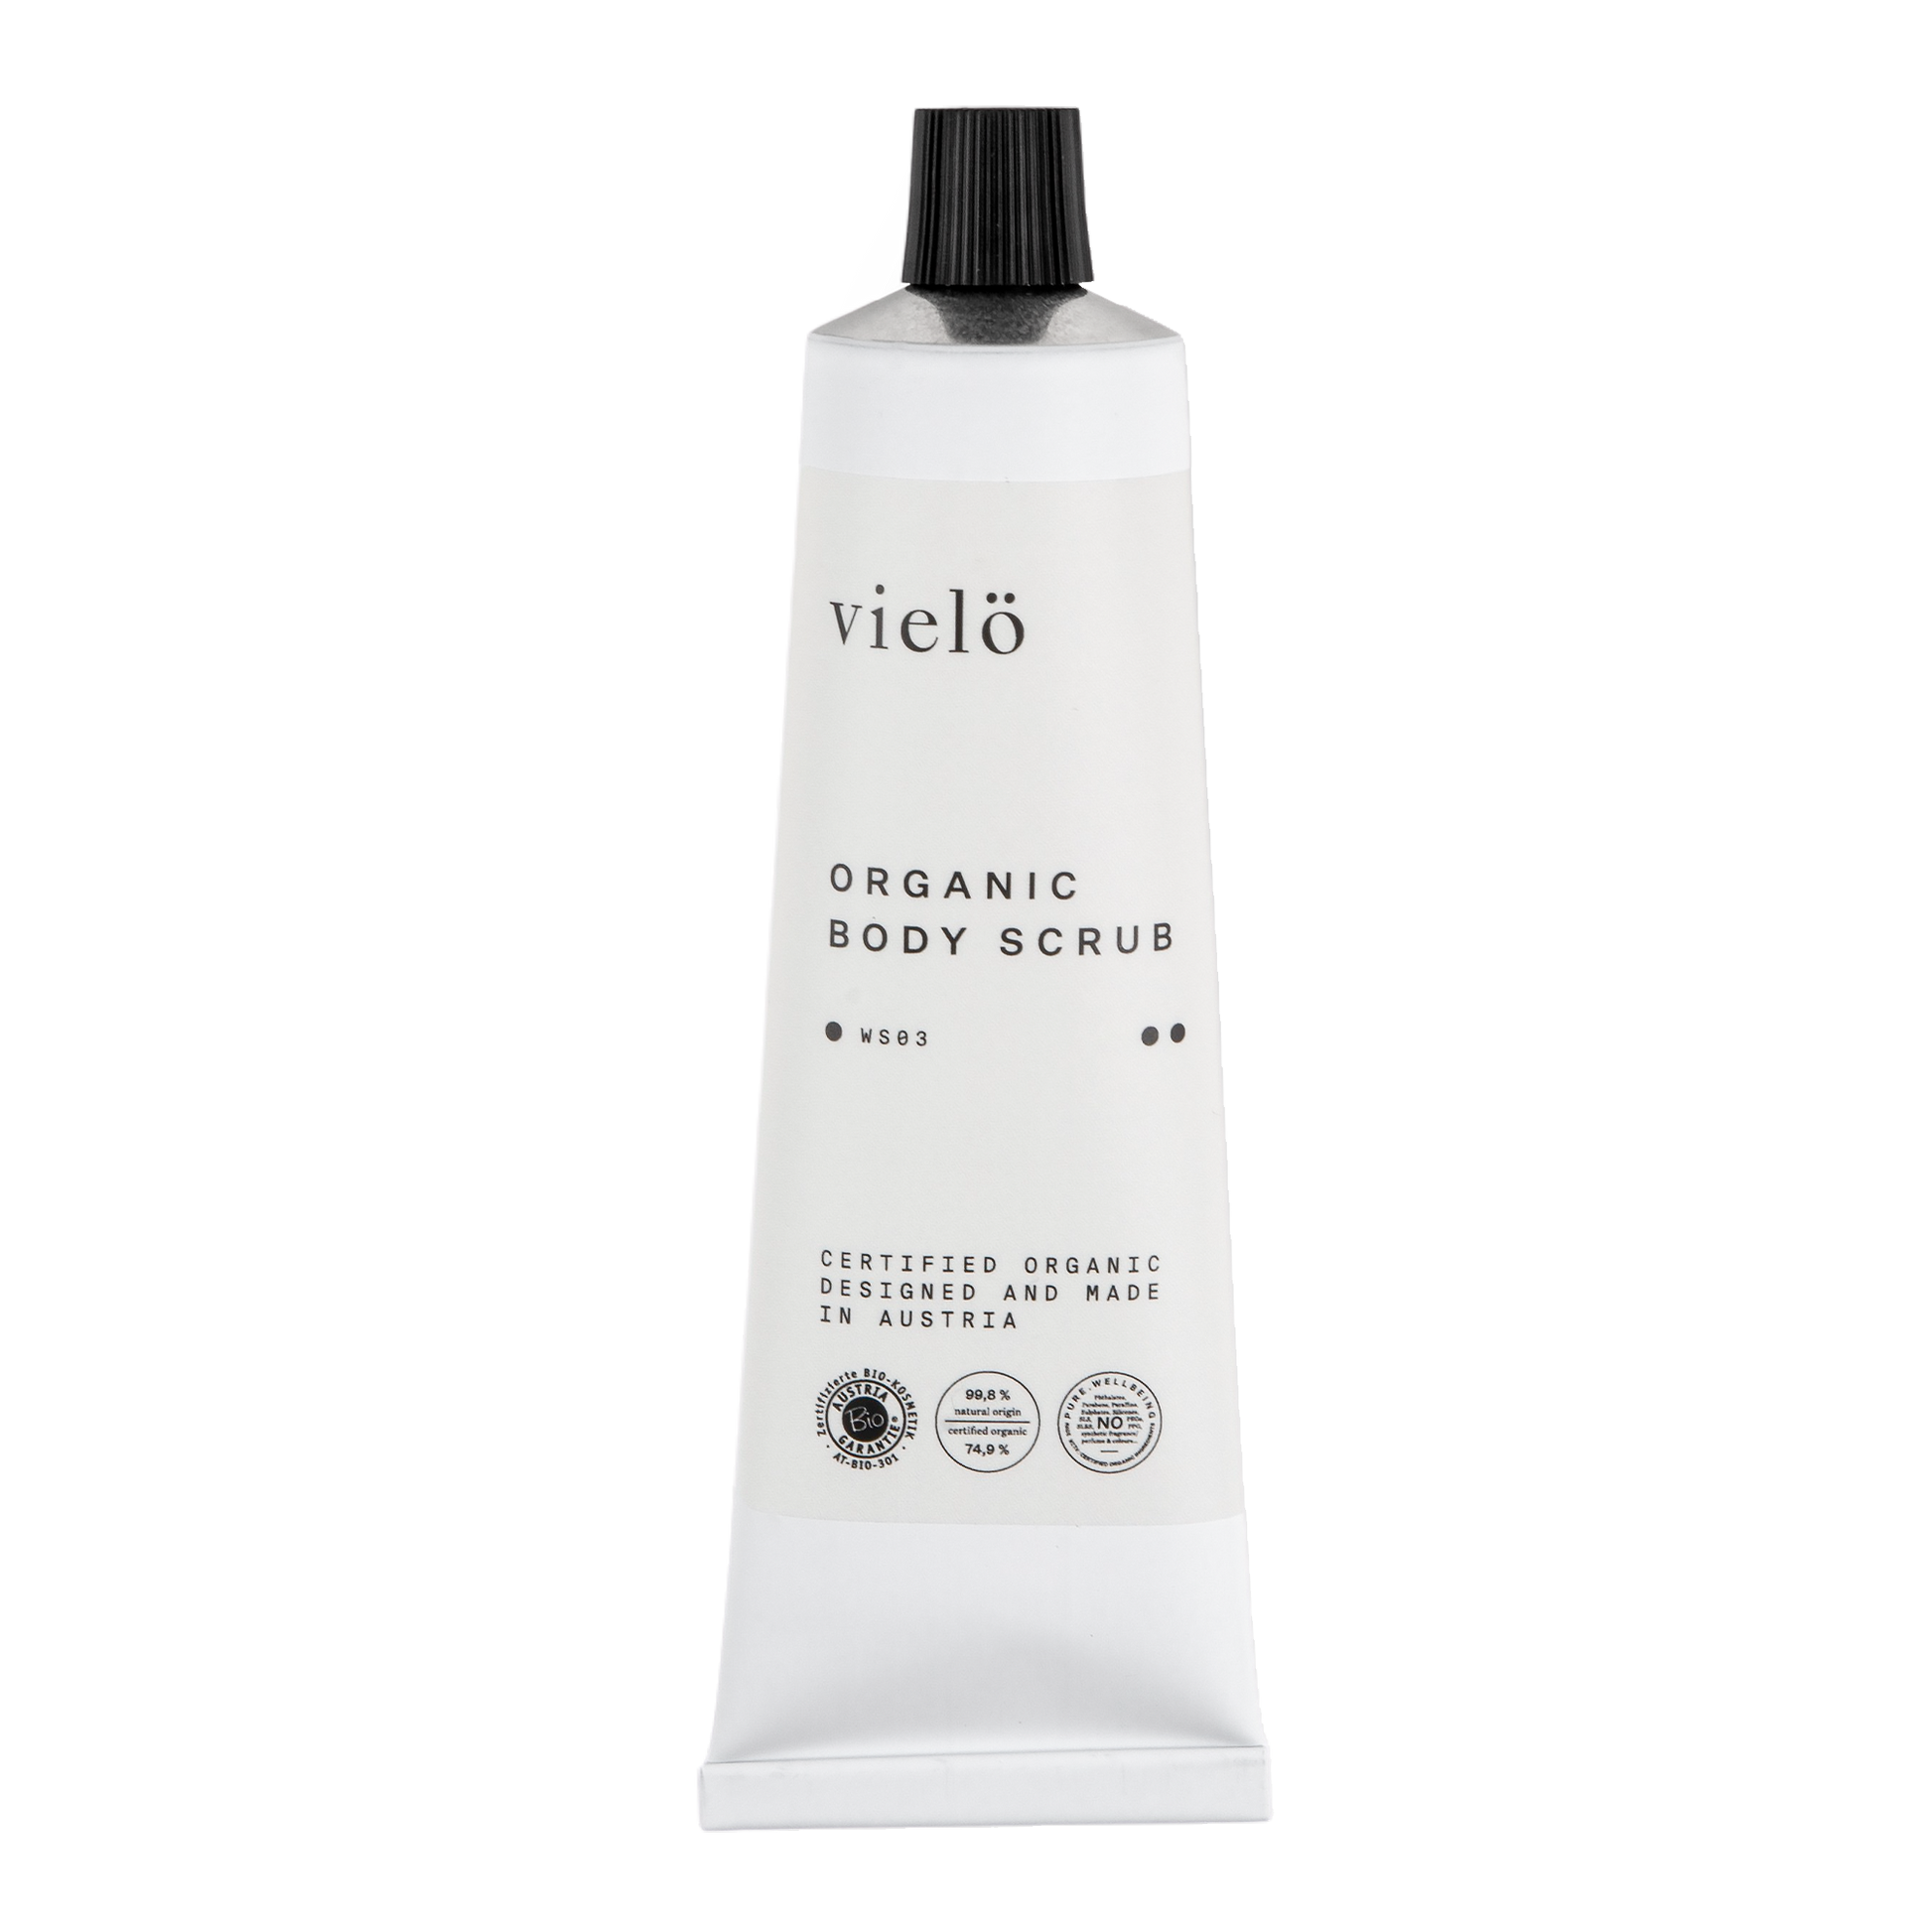 Vielo Organic Body Scrub: Nourishing organic body scrub, specially designed to cleanse and exfoliate the skin gently, to remove dead skin cells and revitalize your body. Suitable for all skin types.